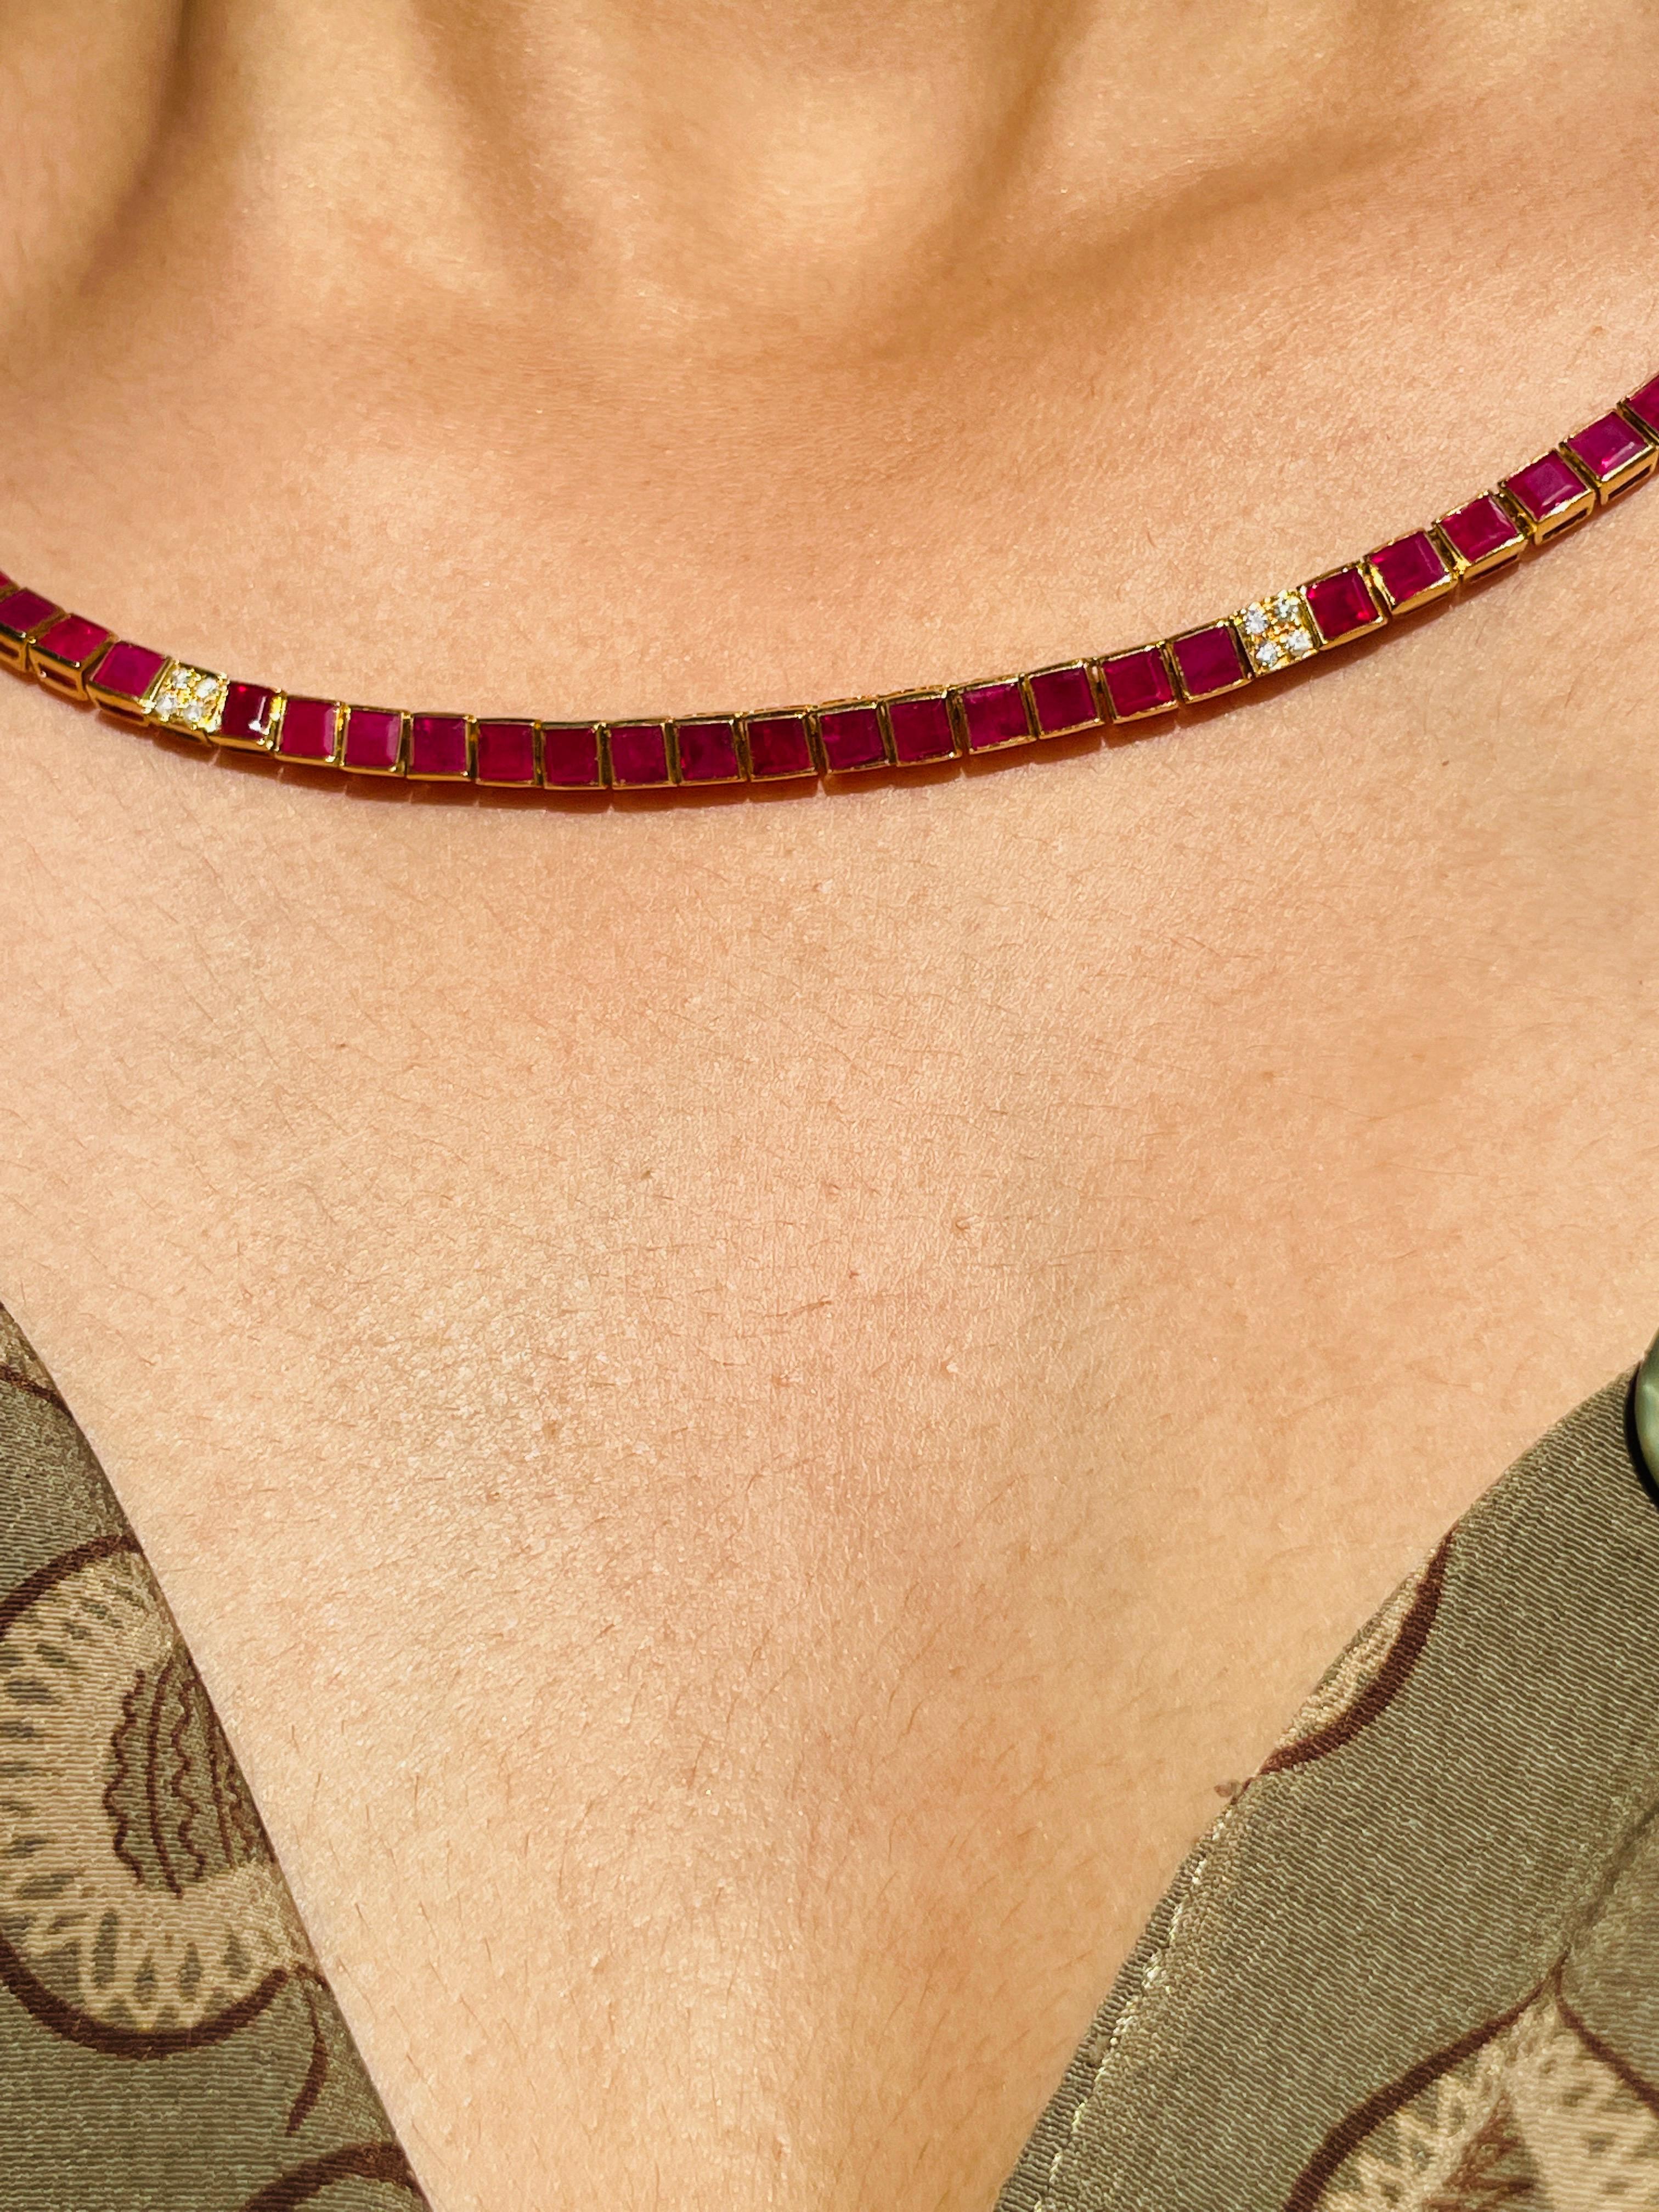 Ruby Necklace in 18K Gold studded with square cut ruby pieces and diamonds.
Accessorize your look with this elegant ruby beaded necklace. This stunning piece of jewelry instantly elevates a casual look or dressy outfit. Comfortable and easy to wear,